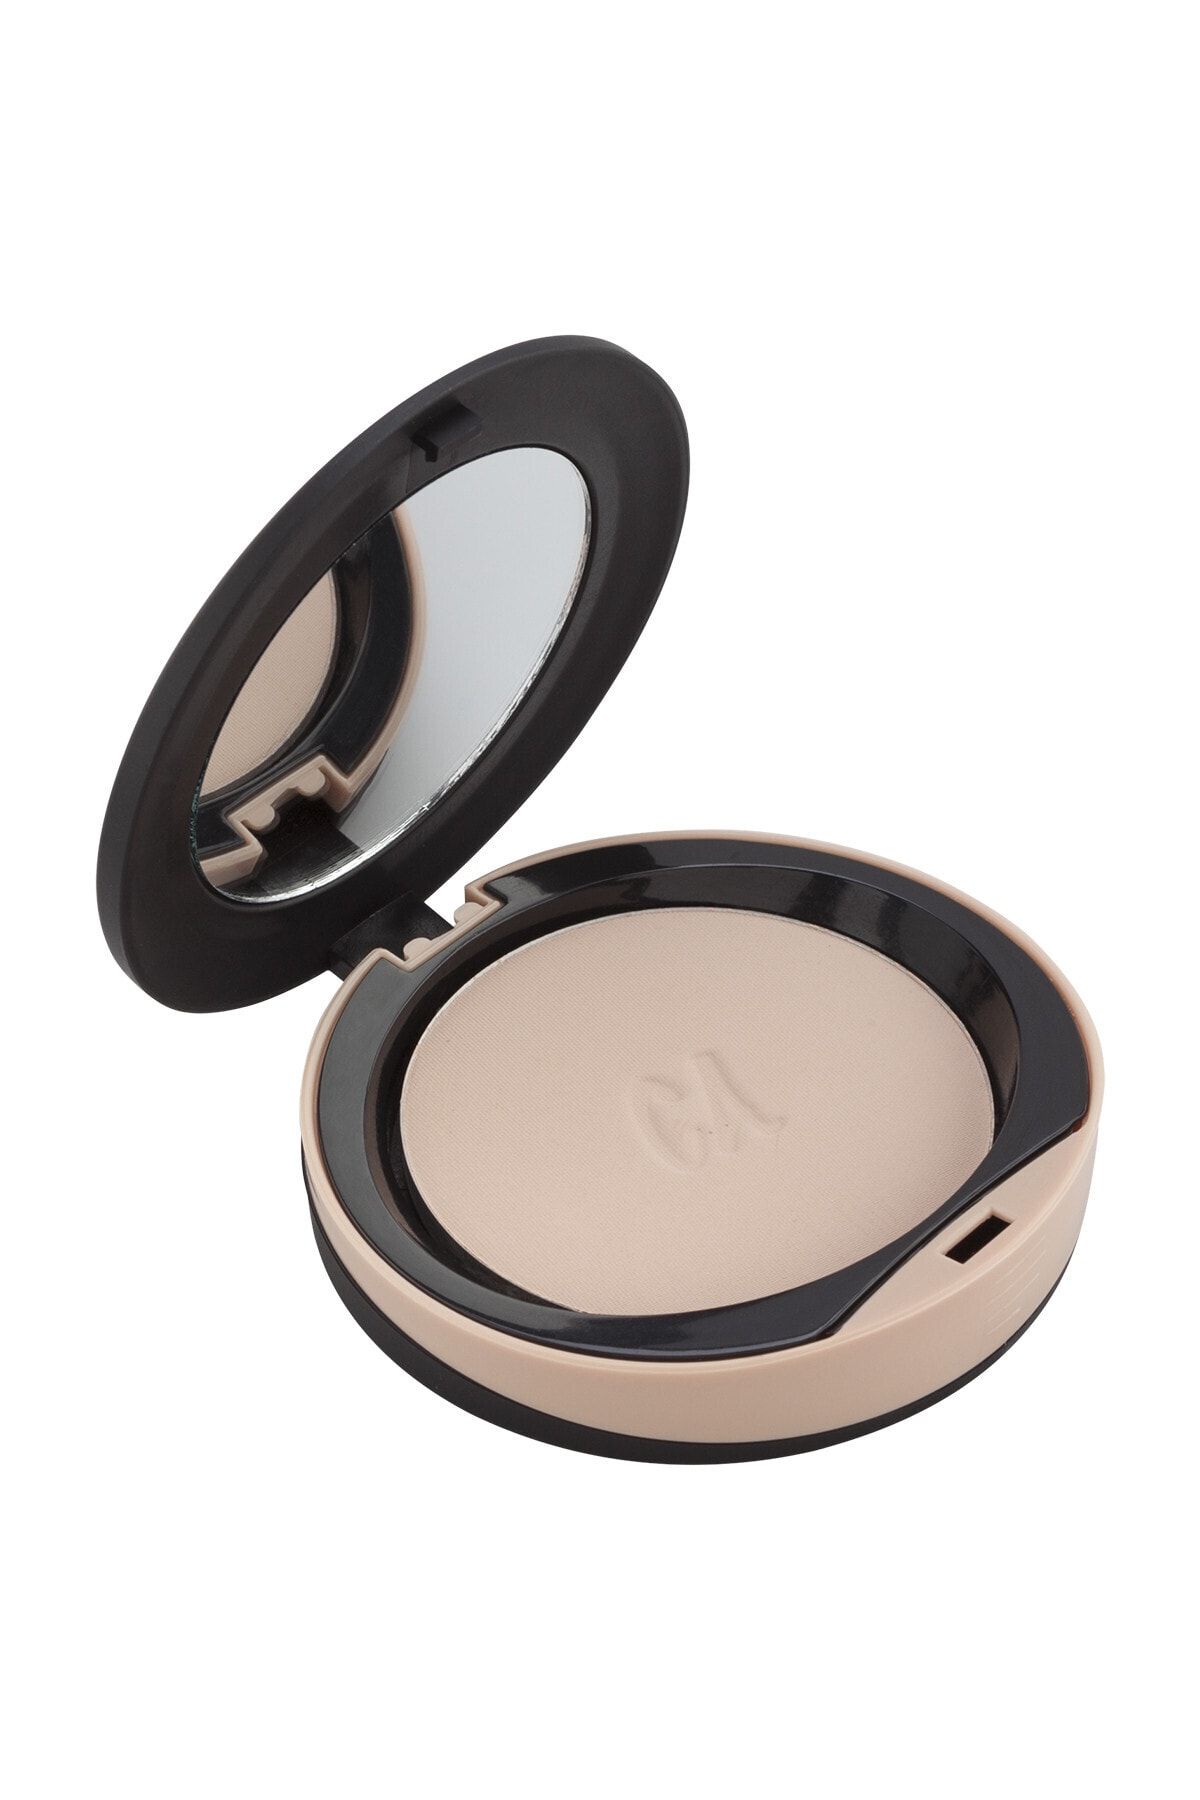 Catherine Arley Mineral Matte Compact Powder Natural Finish M02